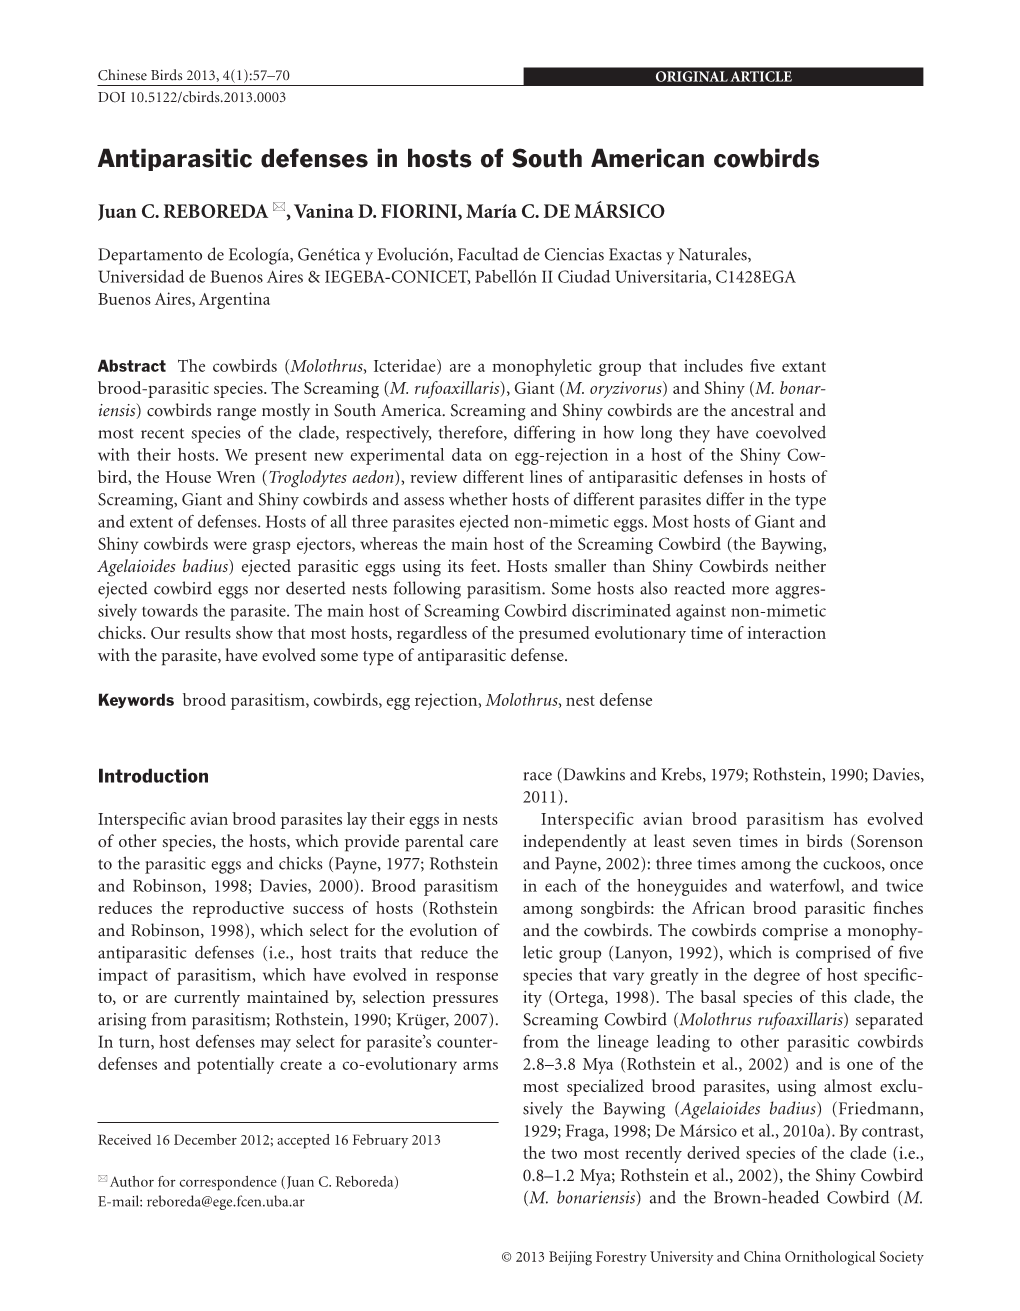 Antiparasitic Defences in Hosts of South American Cowbirds